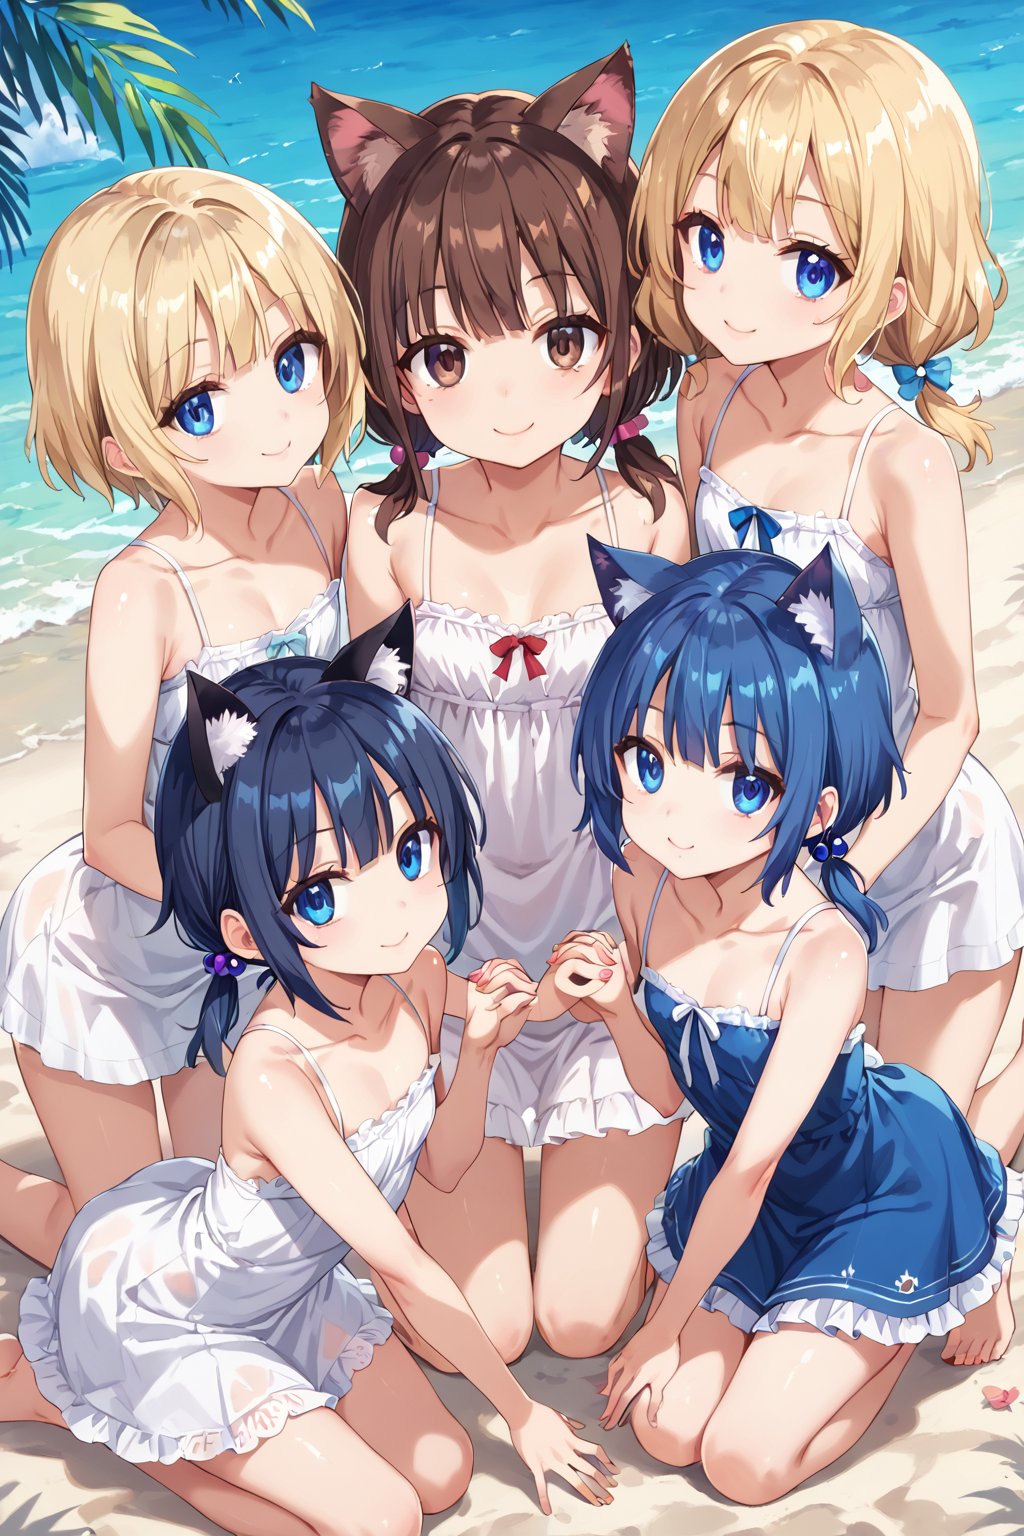 masterpiece, best quality, ultra-detailed, score_9, score_8_up, score_7_up, 
facing viewer, above view, 

,(((Three girls))), 

the first one (shiny brown hair, shiny brown cat ears ,  short hair, light blonde medium hair, low twintails, shiny brown hairs ,brown eyes, ), 

the second one (shiny blonde hair, shiny blonde cat ears ,  short hair, light blonde medium hair, low twintails, shiny blonde hairs ,blue eyes ),

the third one (shiny dark blue hair, shiny dark blue cat ears ,  short bob hair, dark blue medium hair, , shiny dark blue hairs ,blue eyes ),

, kannakamui, emo, Claudia, , (((flat chest))), No public hair, extremely pretty face, beautiful face, ultra-detaild face, cute and round face, ultra-detailed eyes, round eyes, rubby eyes, droopy eyes , 

Exact finger count, beautiful and delicate and ultra-detailed finger, 1 of the 5 beautiful fingers is a thumb and natural shape,

(((very young Petite girl))), skinny,

((leaning forward)),((pow pose)), kneeling ,hip shift ,

good friends, holding hands, sexfriend,

summer, in the lakeside, outdoor,

white Summer-like camisole dress , colored lace line ribbon, lots of lace,shyness or smile,
